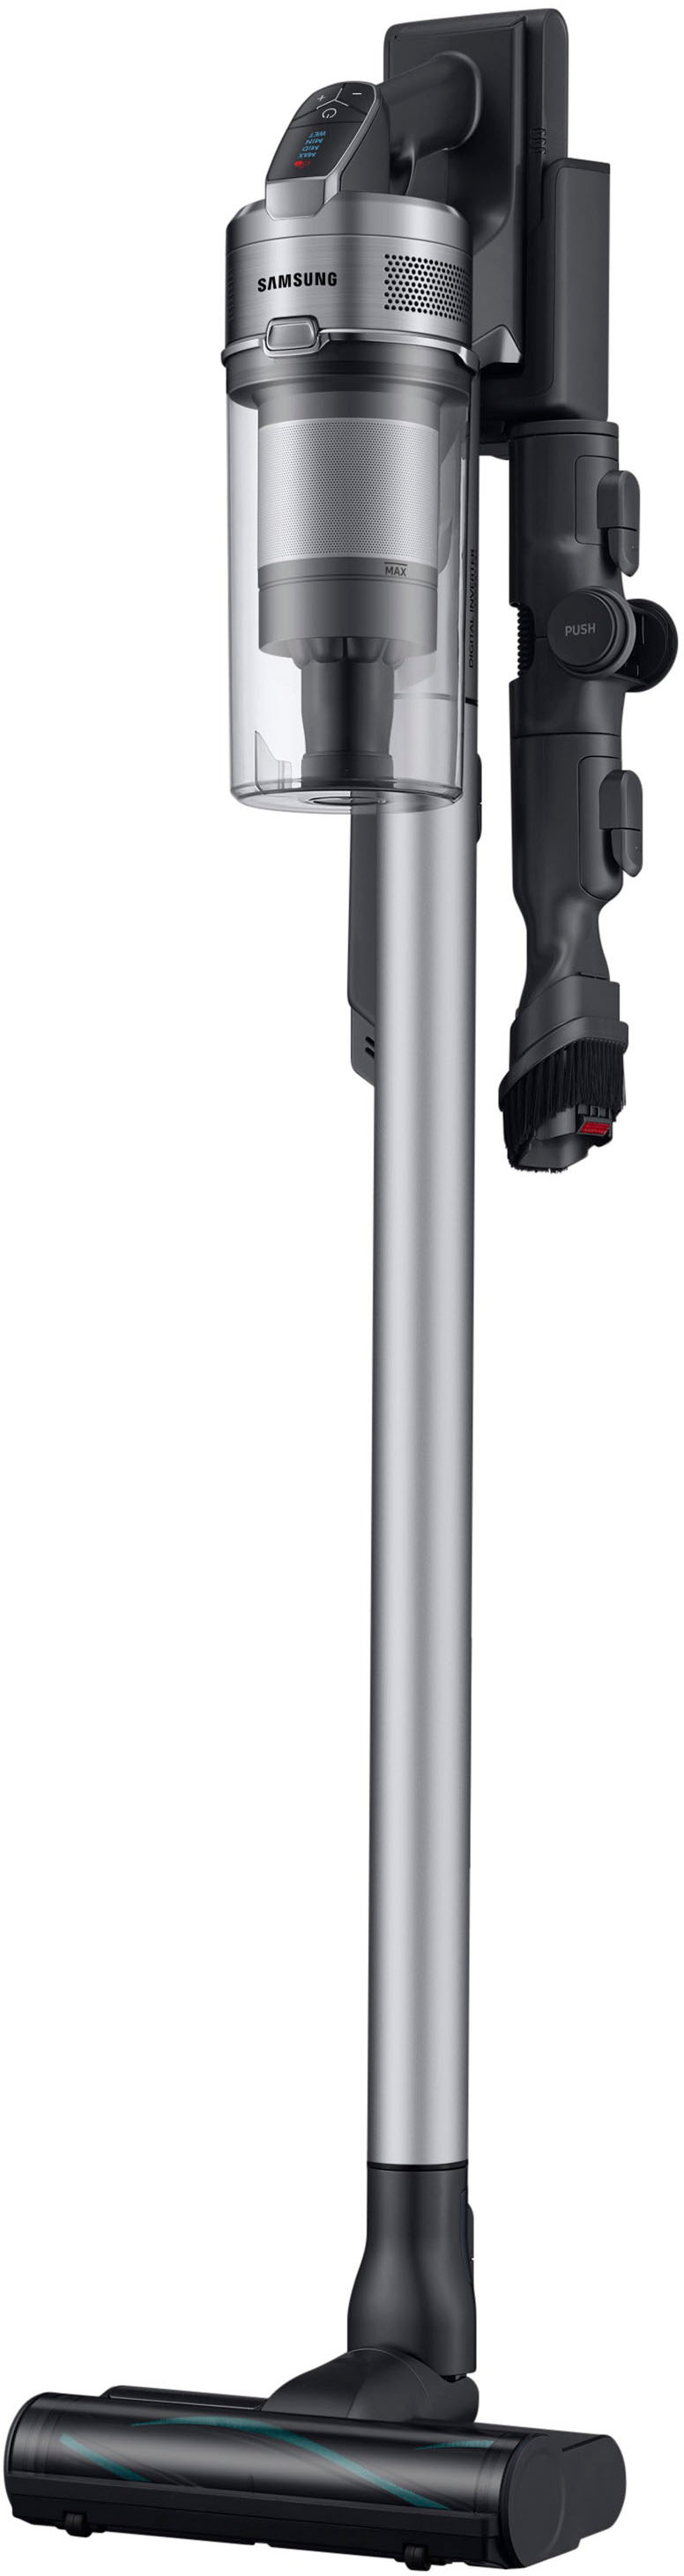 filter ontrouw kabel Samsung Jet™ 75+ Cordless Stick Vacuum with Additional Battery Titan  ChroMetal VS20T7551R5/AA - Best Buy